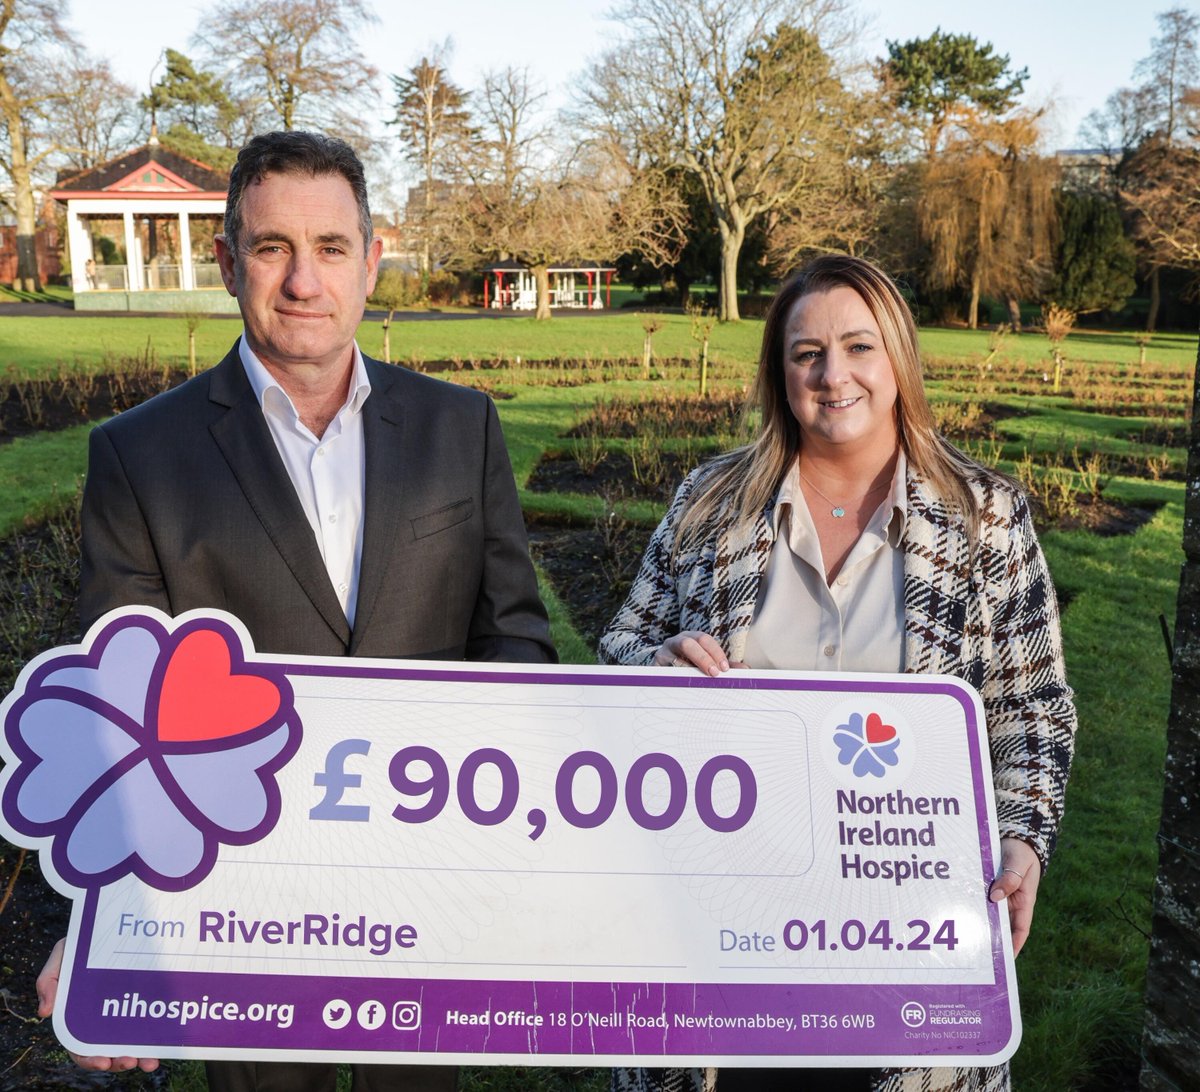 Big news! @RiverRidge_ our valued partners, has hit a major milestone, raising £90k for NI Children’s Hospice. 💜 Huge thanks to everyone at RiverRidge for making a real difference in the lives of local children and families. 🙌 #CorporateSupport #ThankYou